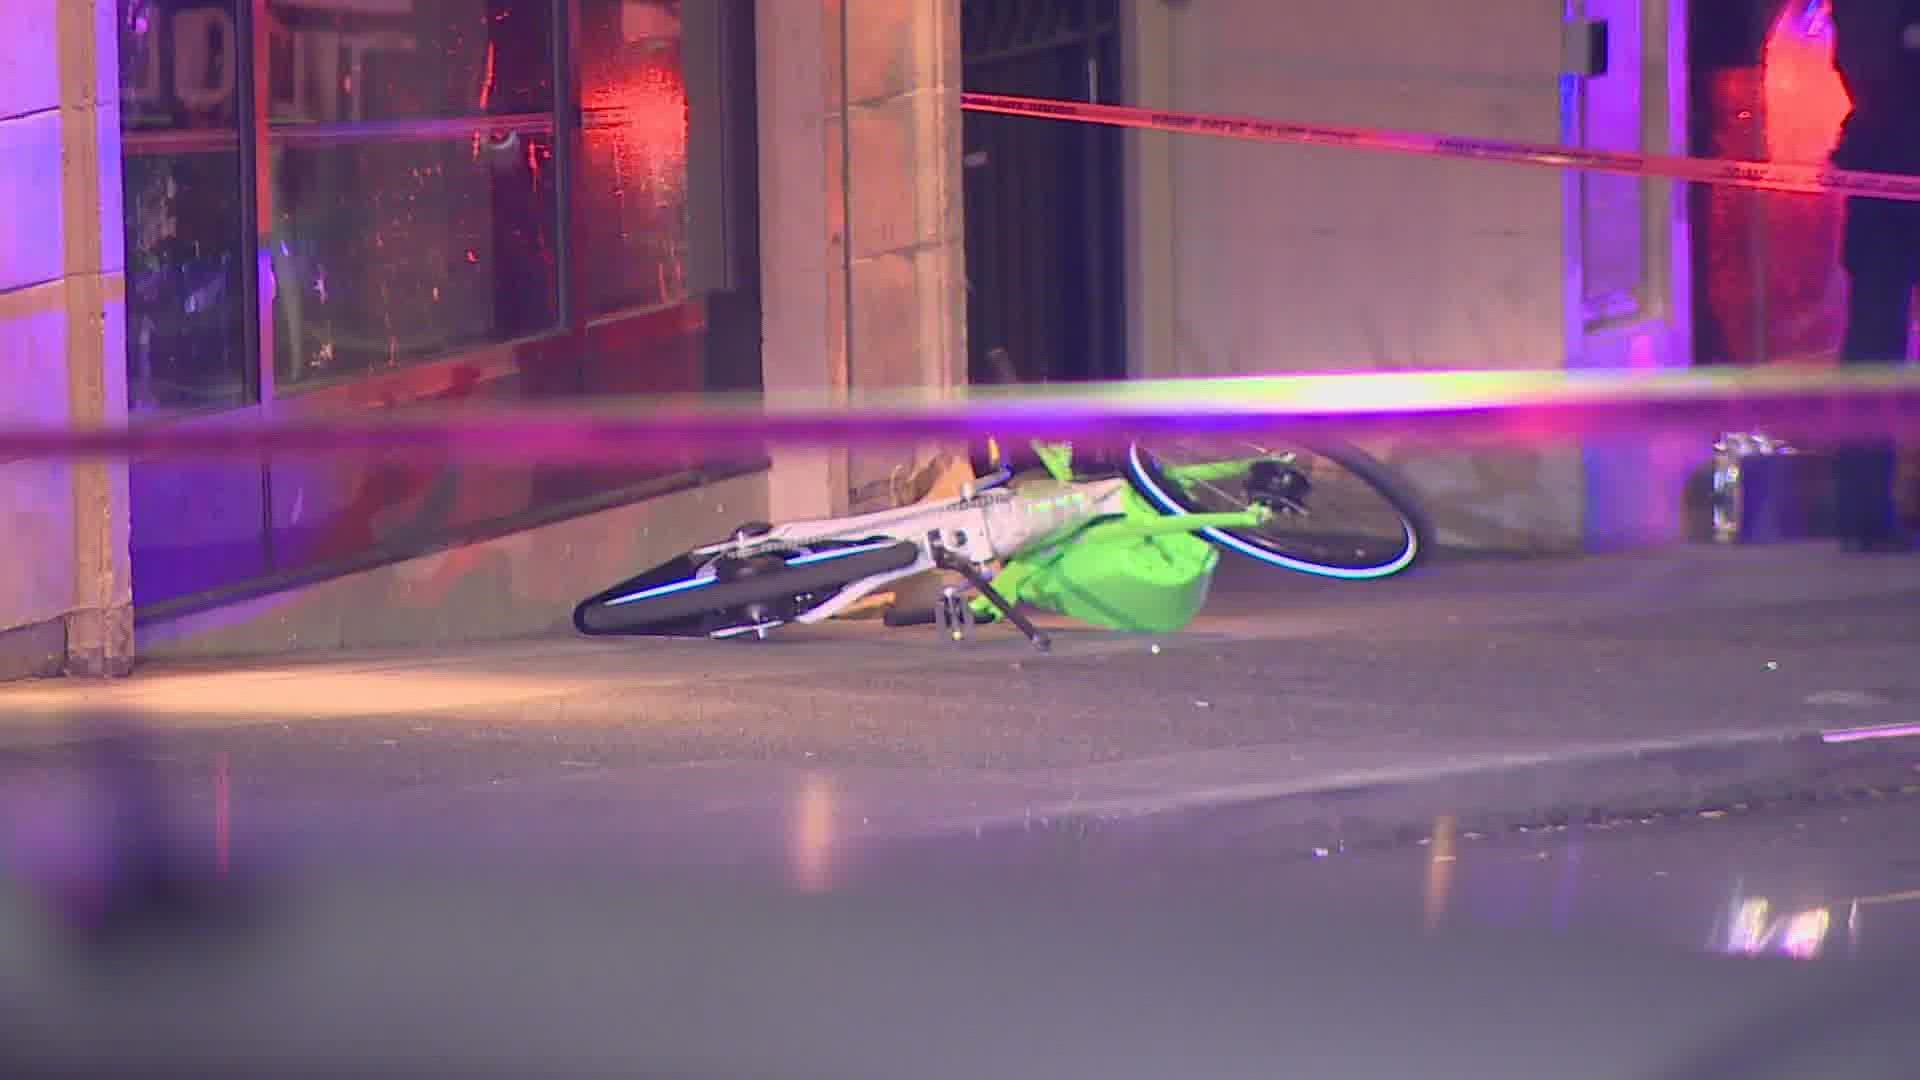 A man was shot and killed overnight on 4th and Main in Seattle's Chinatown International District